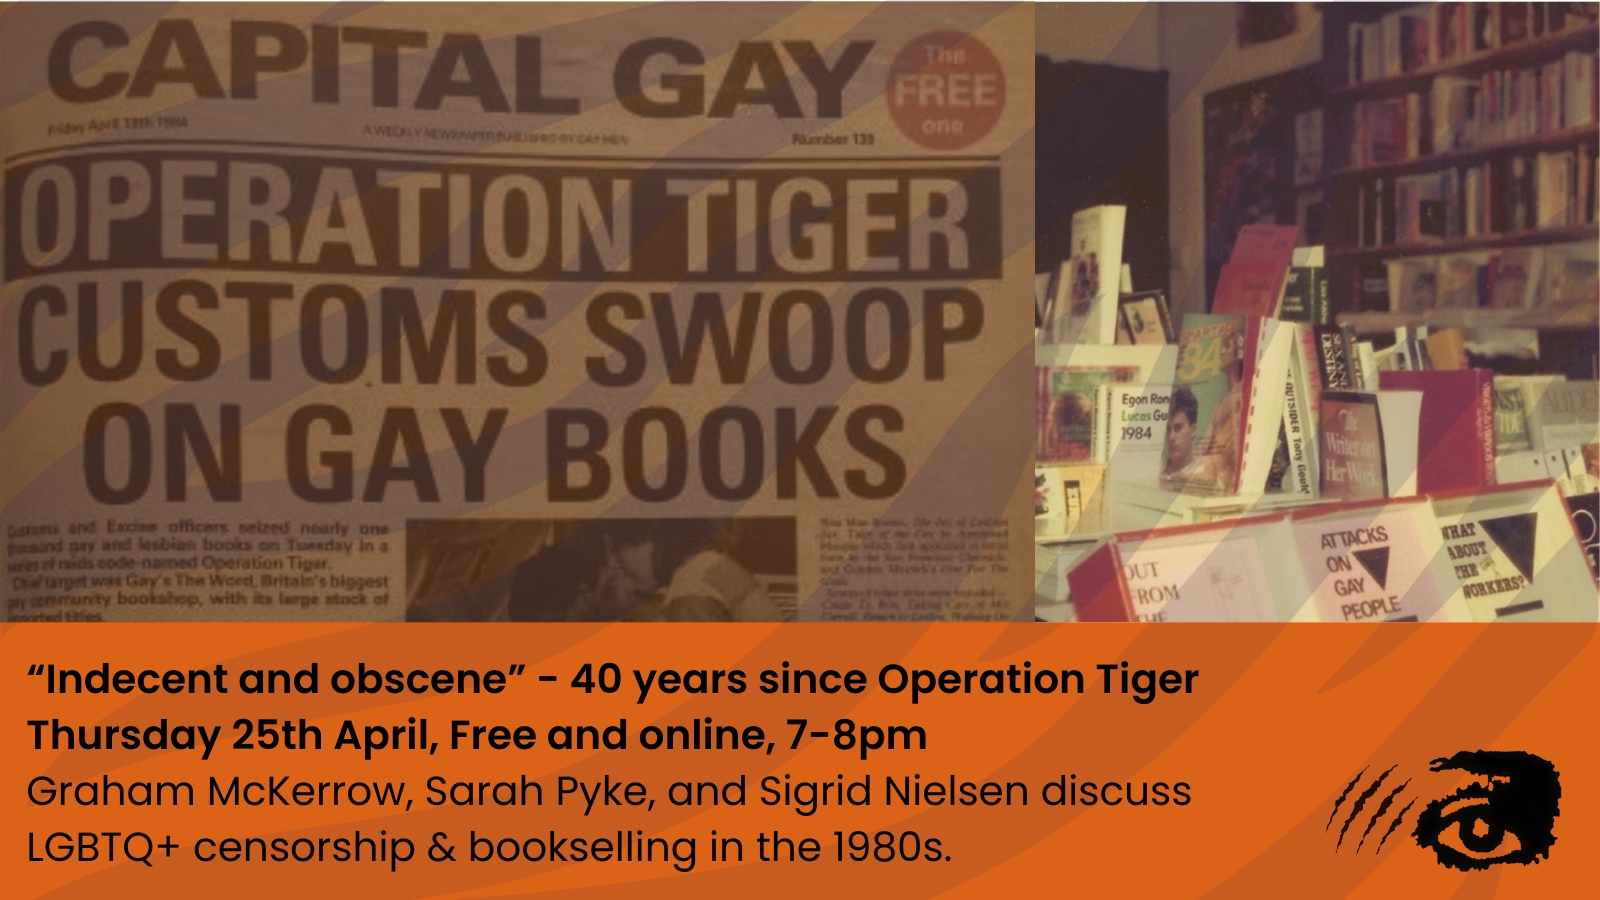 Newspaper clipping with the headline: Operation Tiger, Customs swoop on gay books.